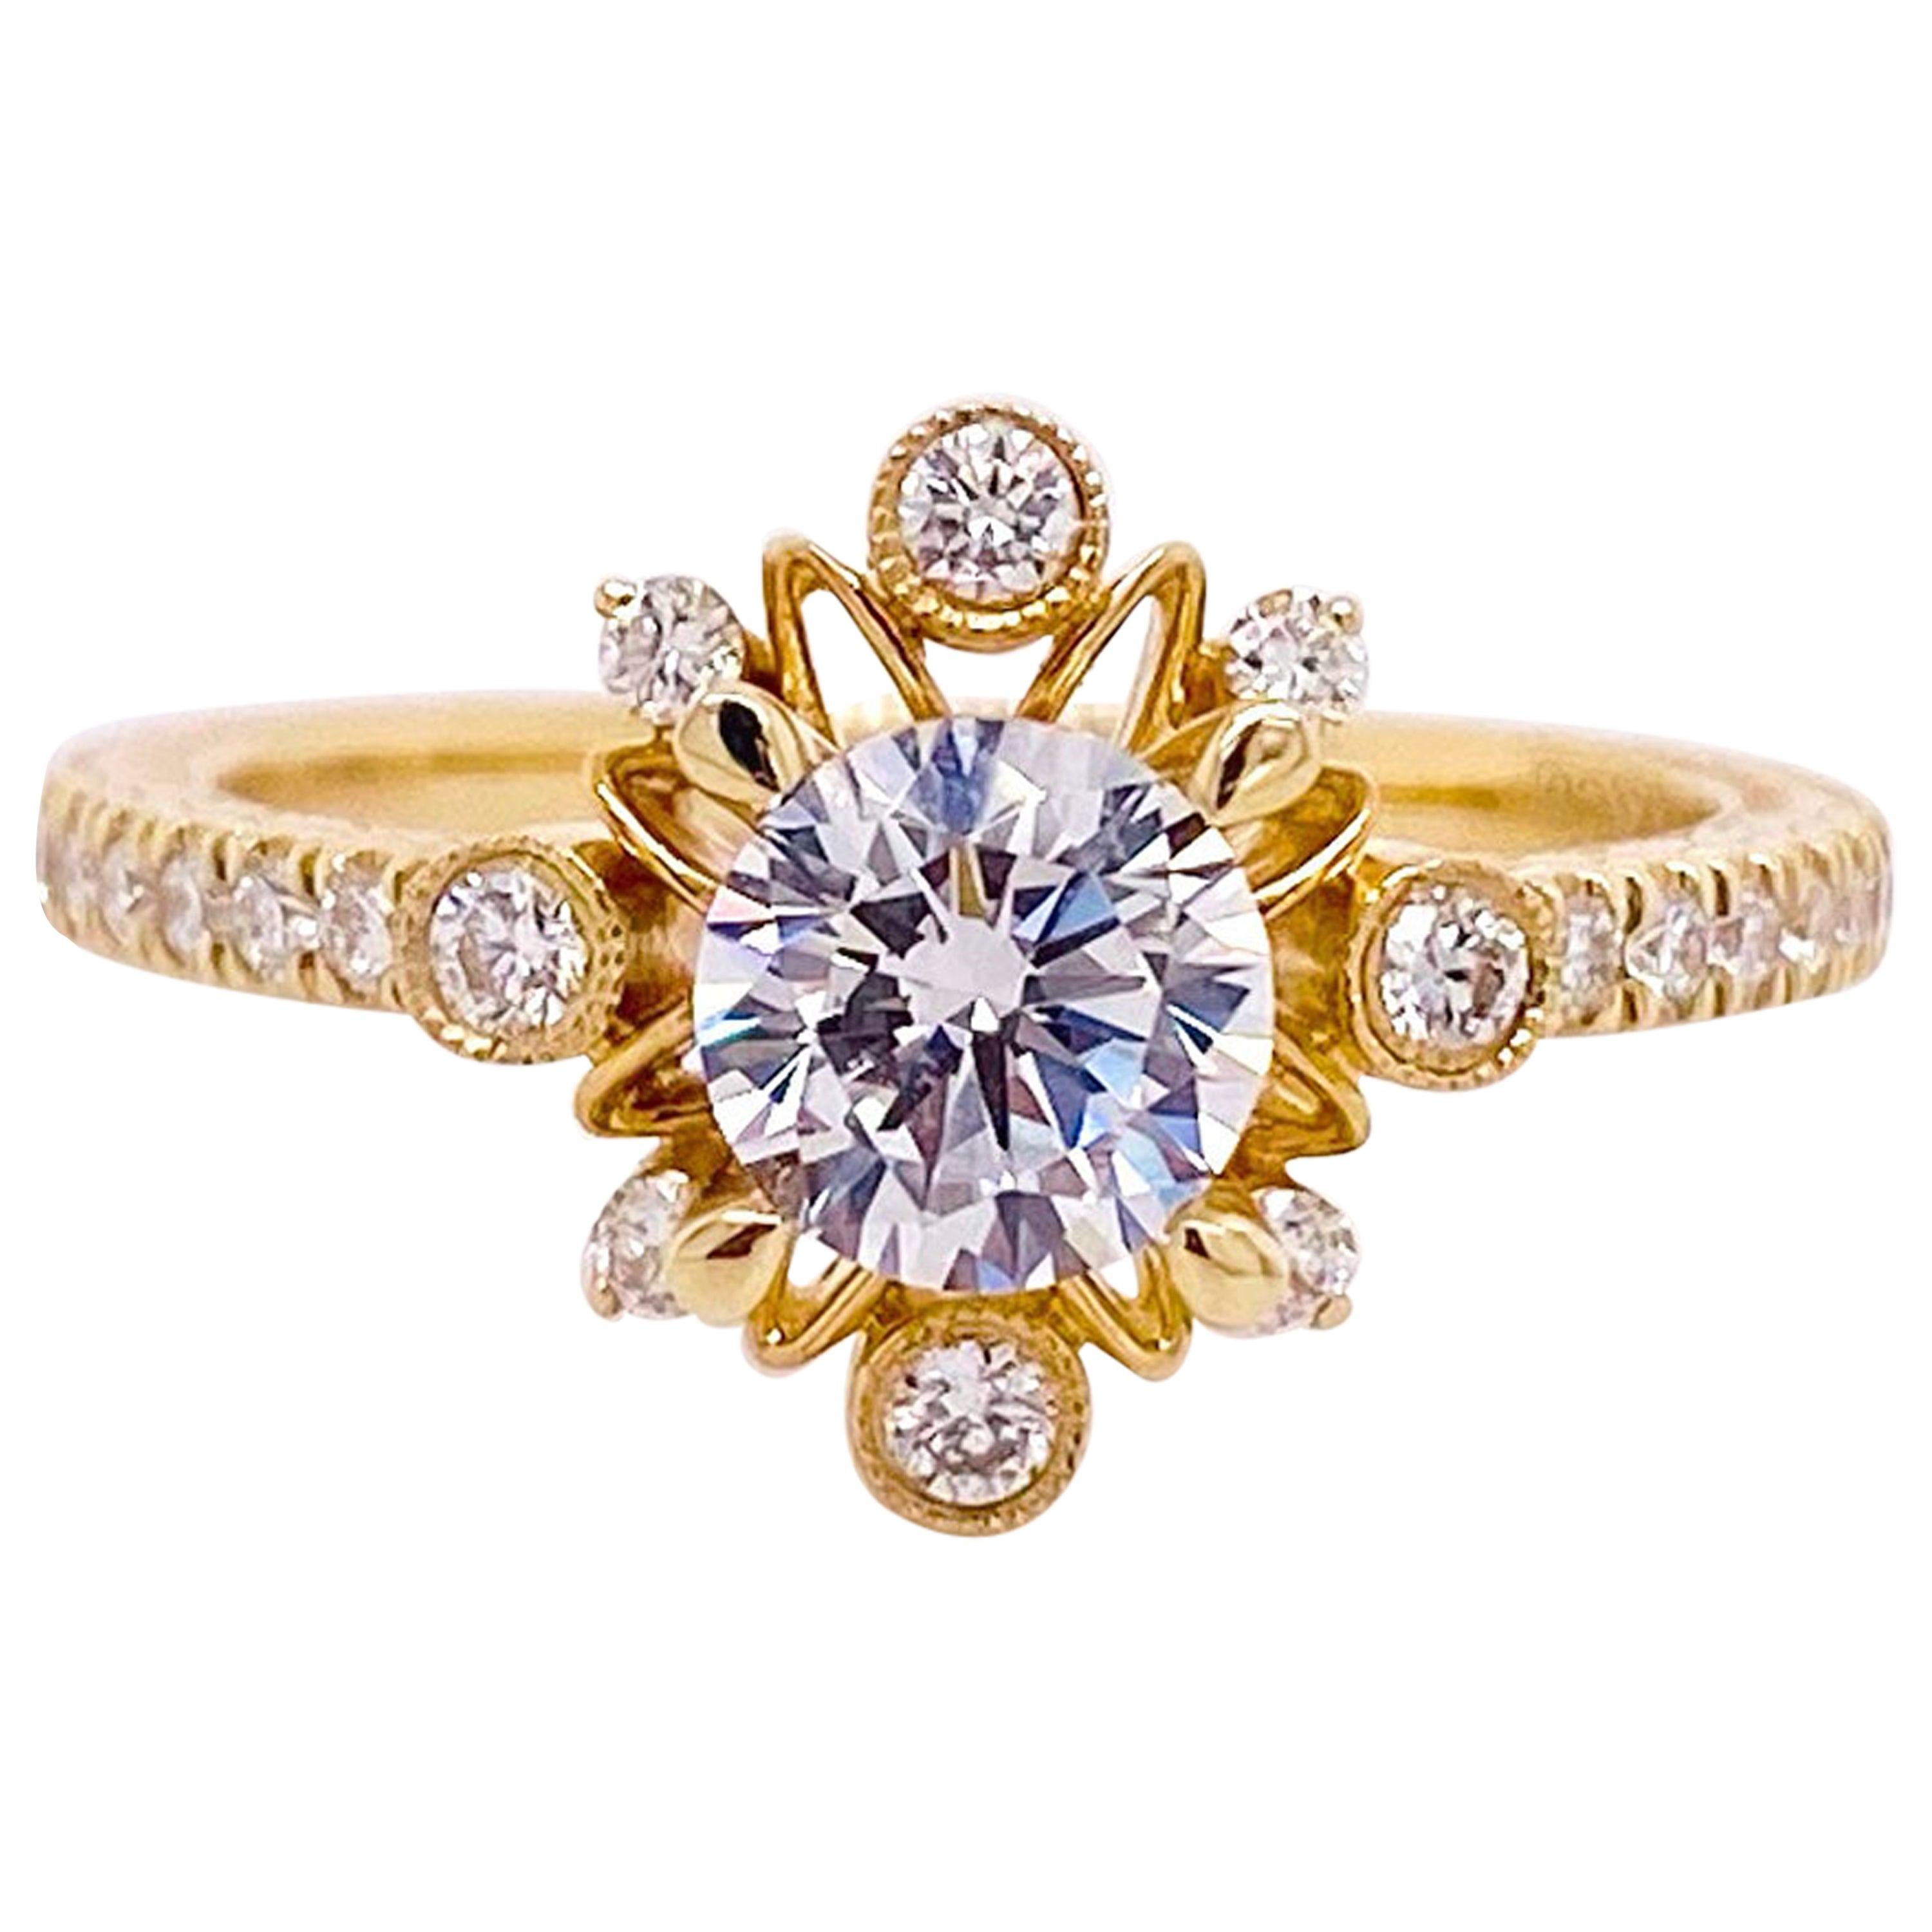 For Sale:  One Carat Diamond Engagement Ring, Fancy Halo, Yellow Gold, Round Brilliant